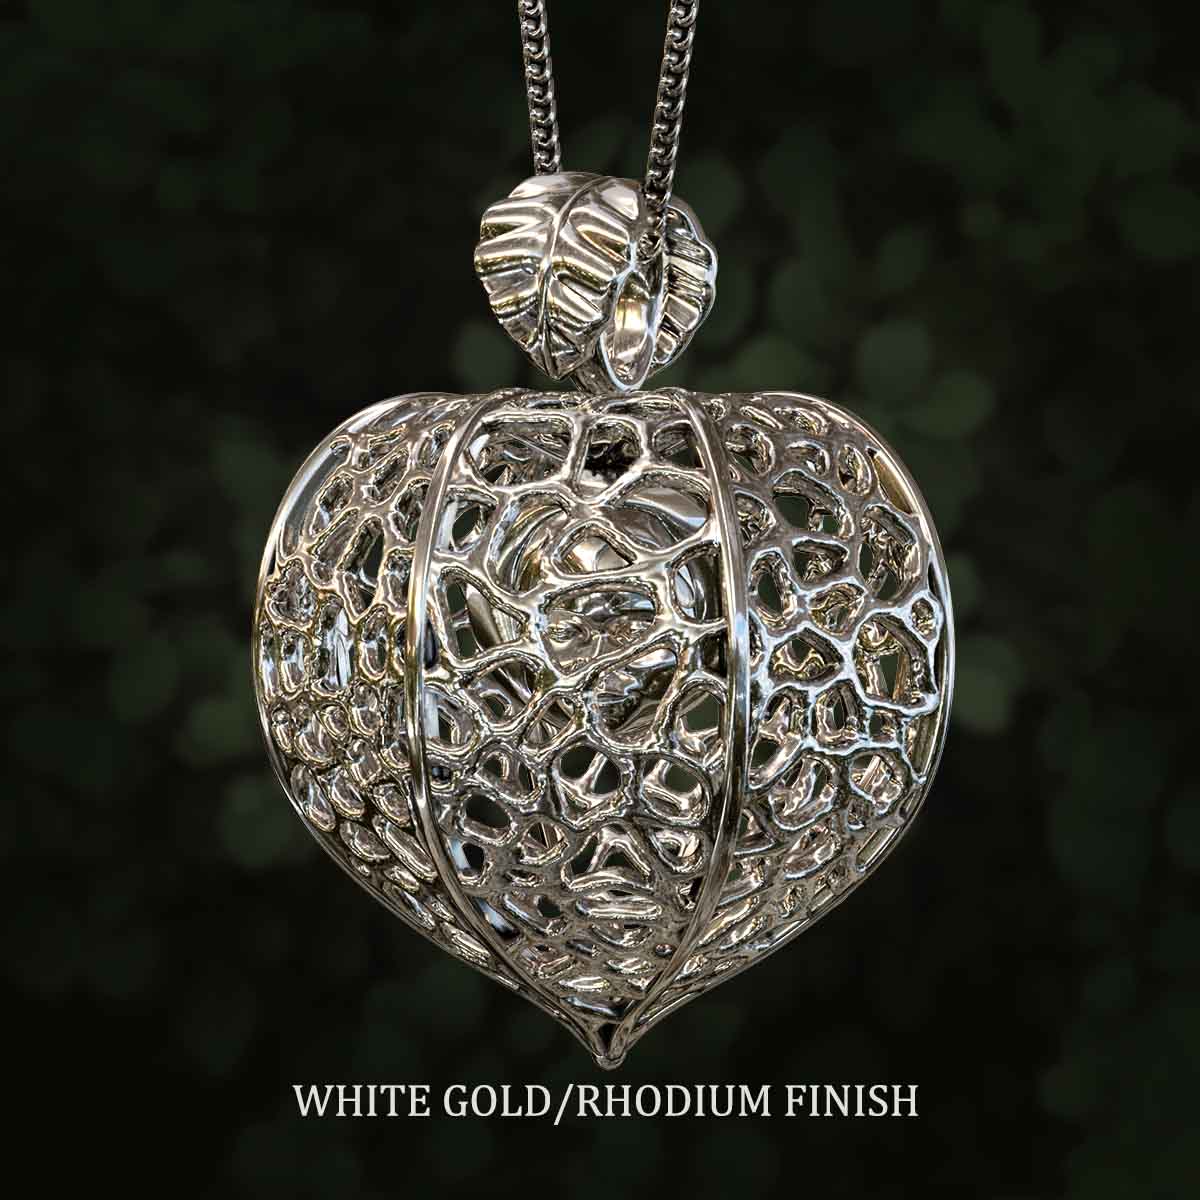 White-Gold-Rhodium-Finish-Chinese-Lantern-Plant-With-a-Cute-Face-Inside-the-Seed-Pendant-Jewelry-For-Necklace